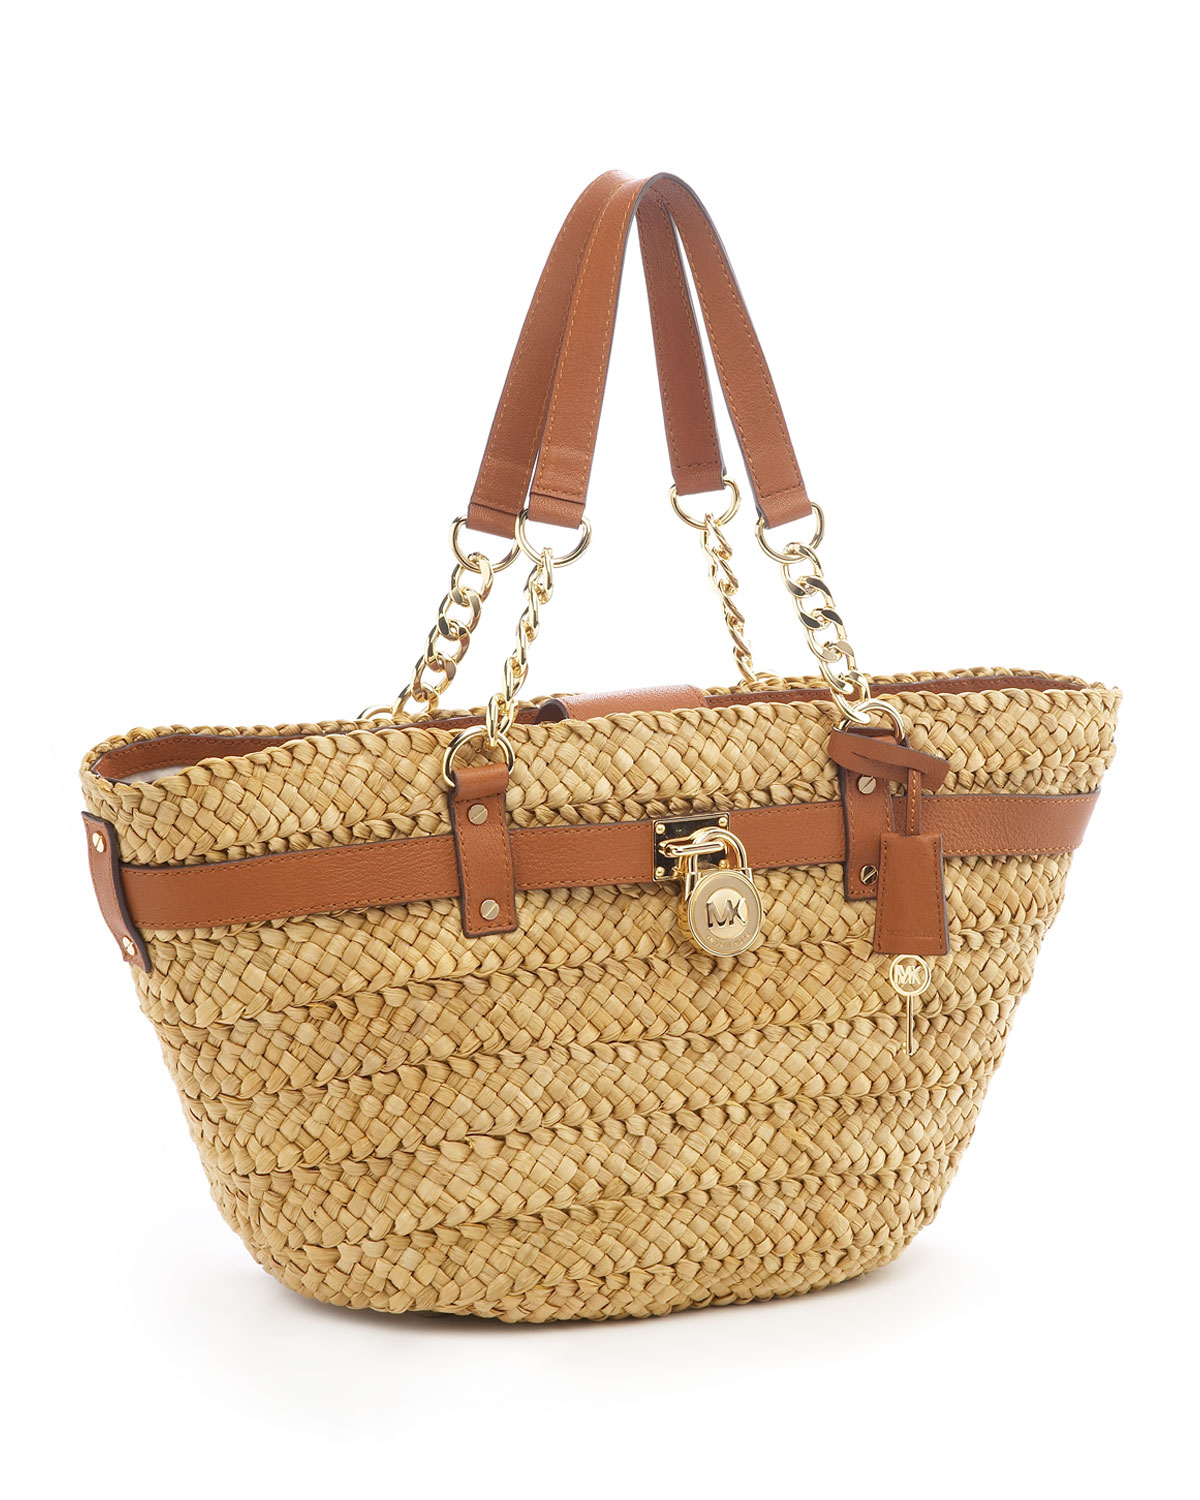 Lyst - Michael kors Hamilton Large Straw Tote Luggage in Natural